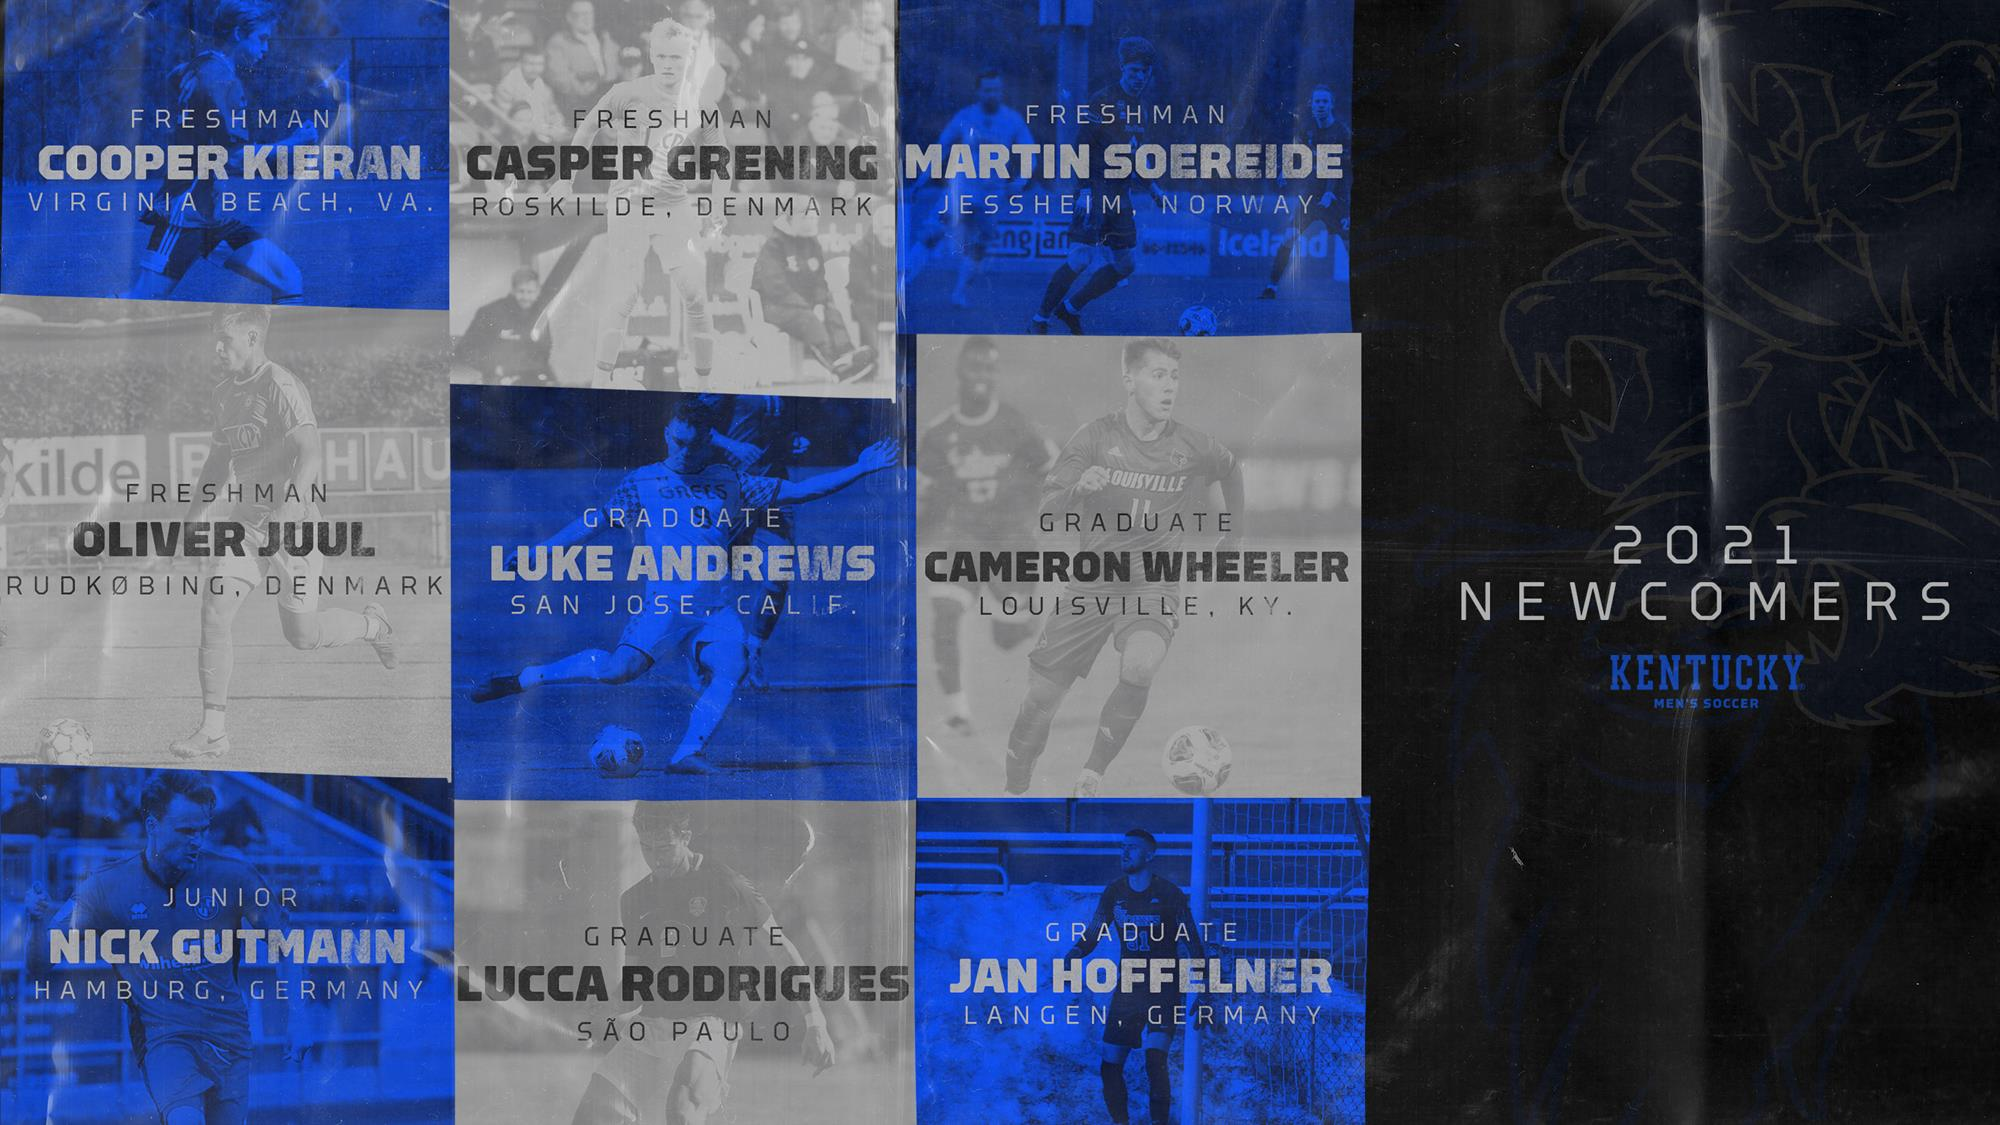 UK Men’s Soccer Adds 9 Newcomers to 2021 Roster